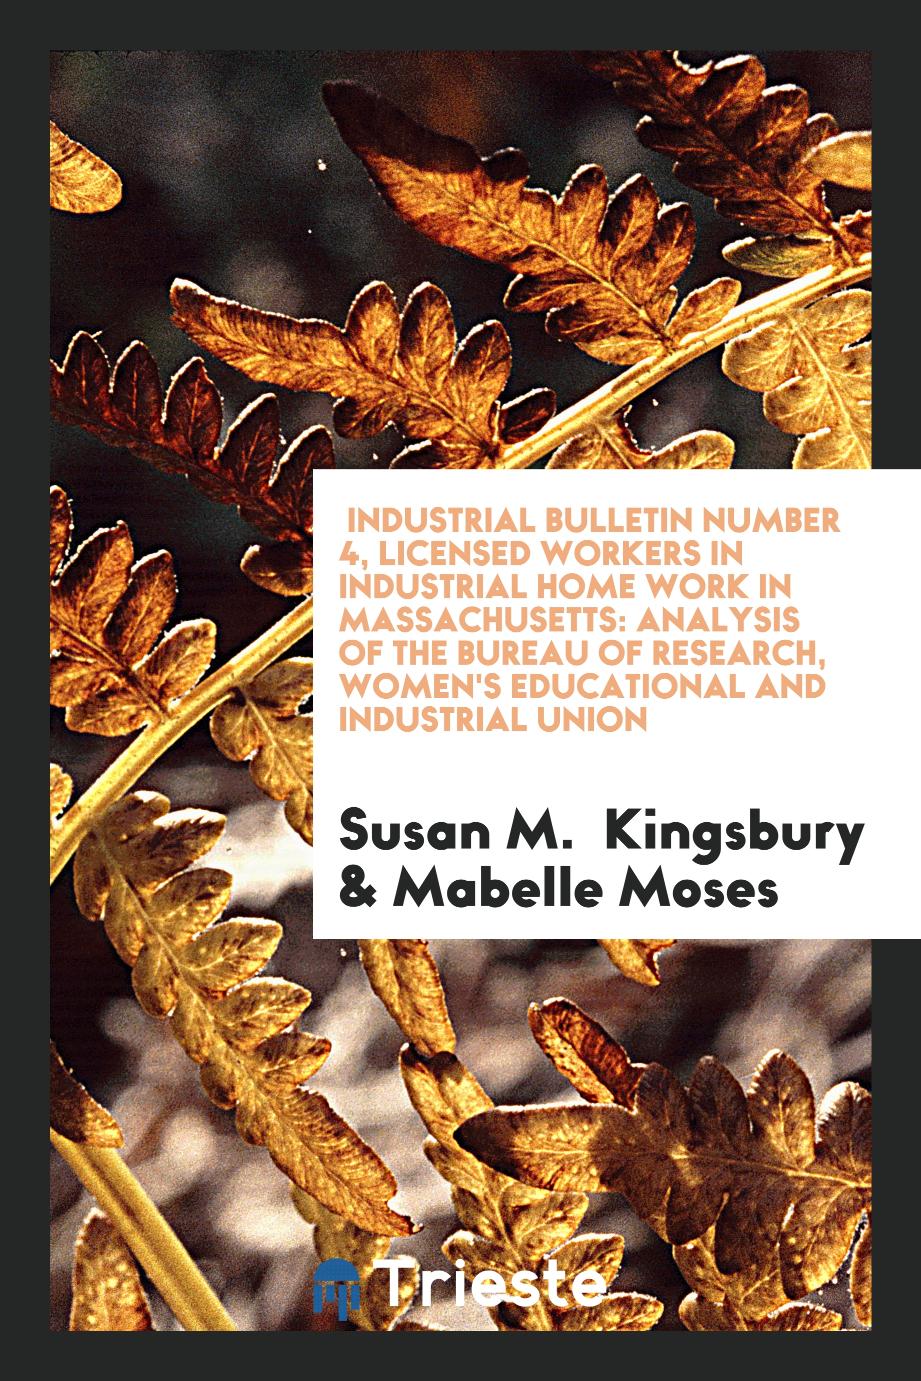 Industrial Bulletin Number 4, Licensed Workers in Industrial Home Work in Massachusetts: Analysis of the Bureau of Research, Women's Educational and Industrial Union